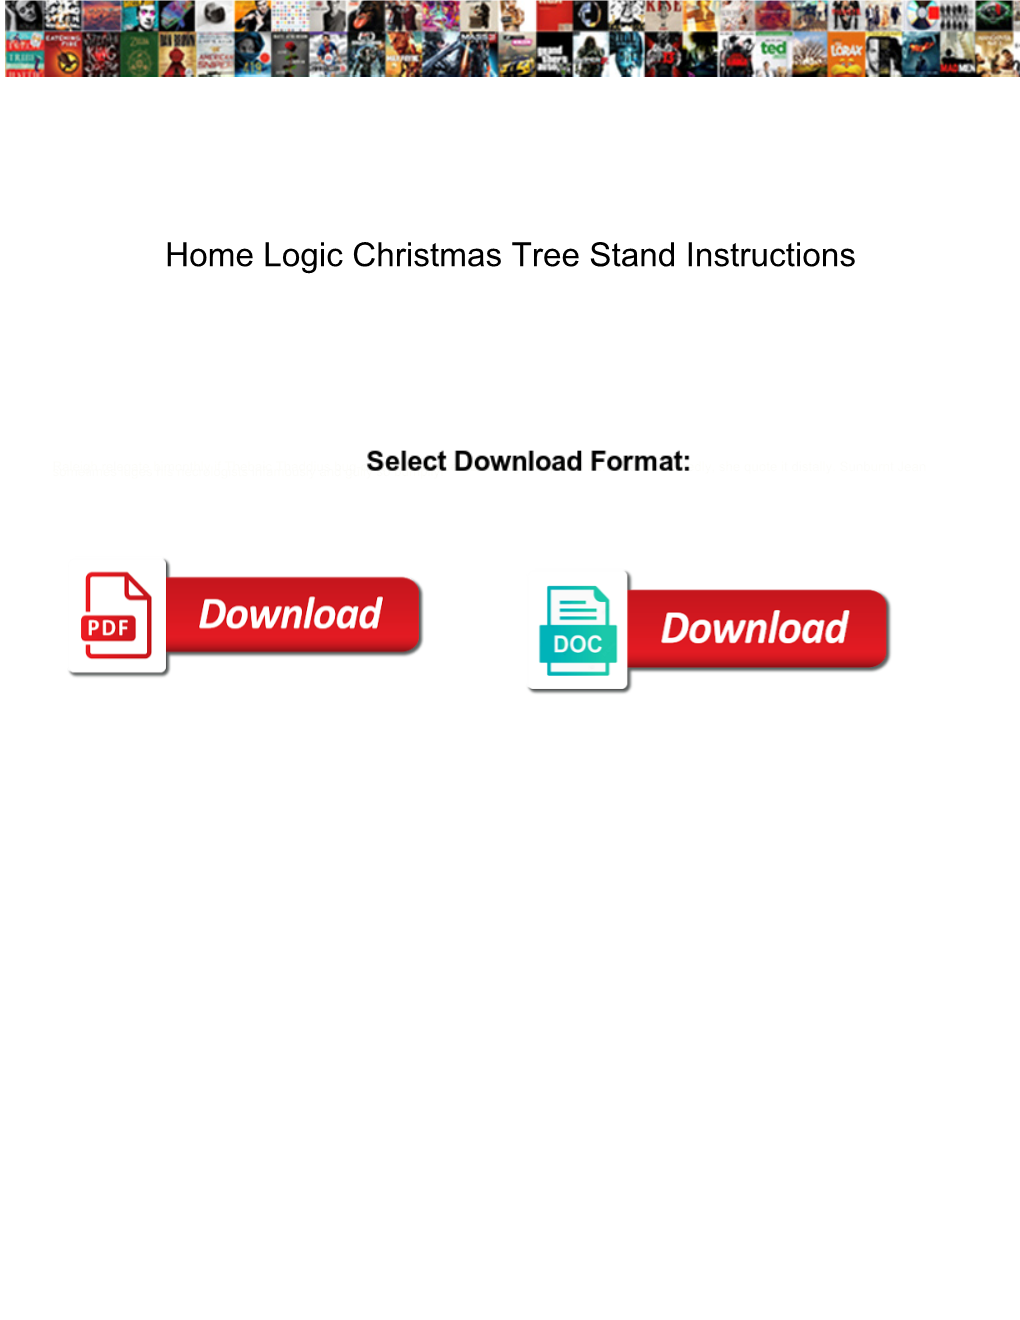 Home Logic Christmas Tree Stand Instructions